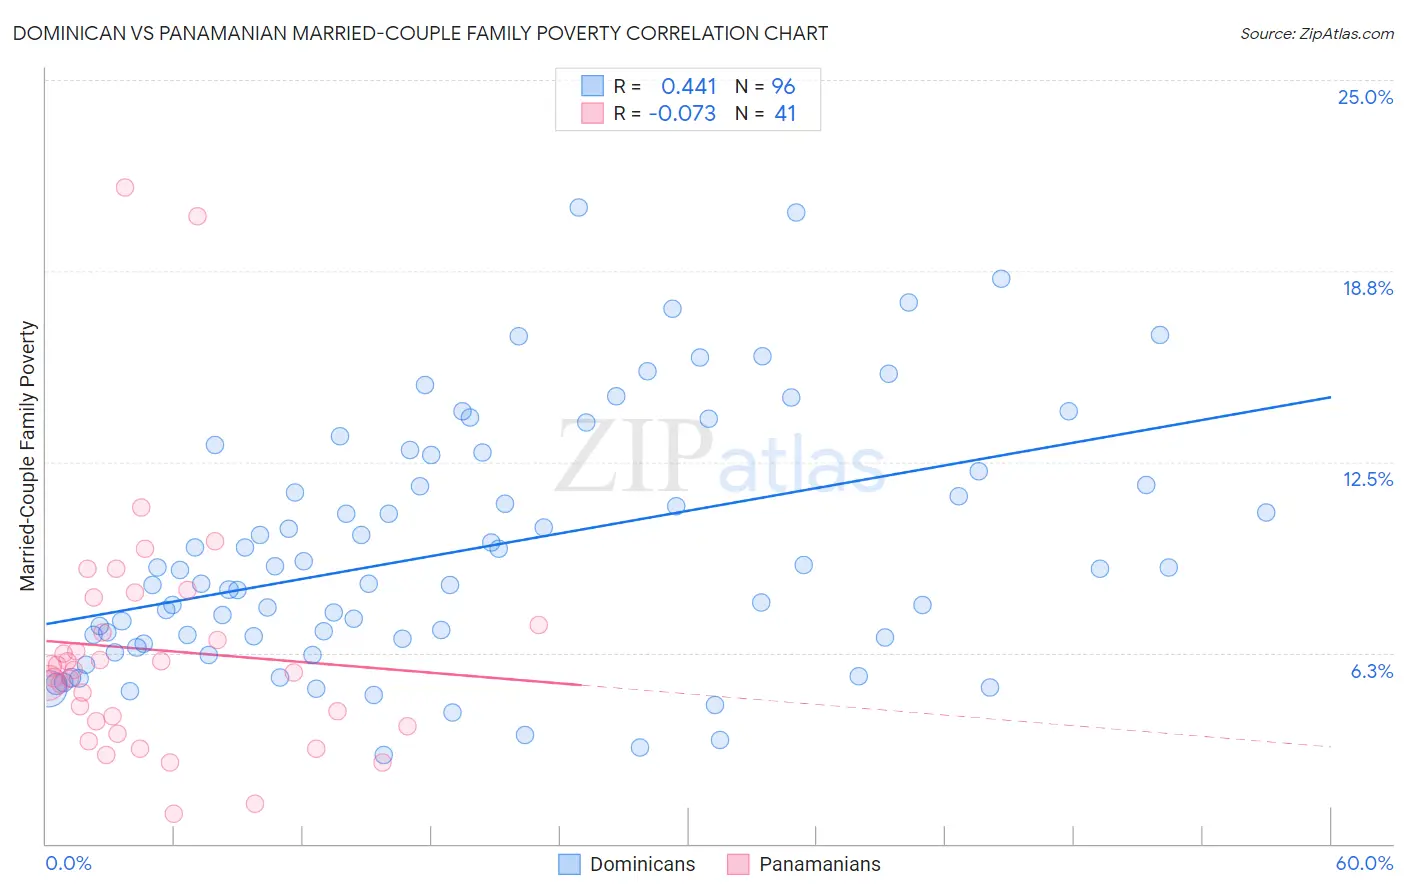 Dominican vs Panamanian Married-Couple Family Poverty